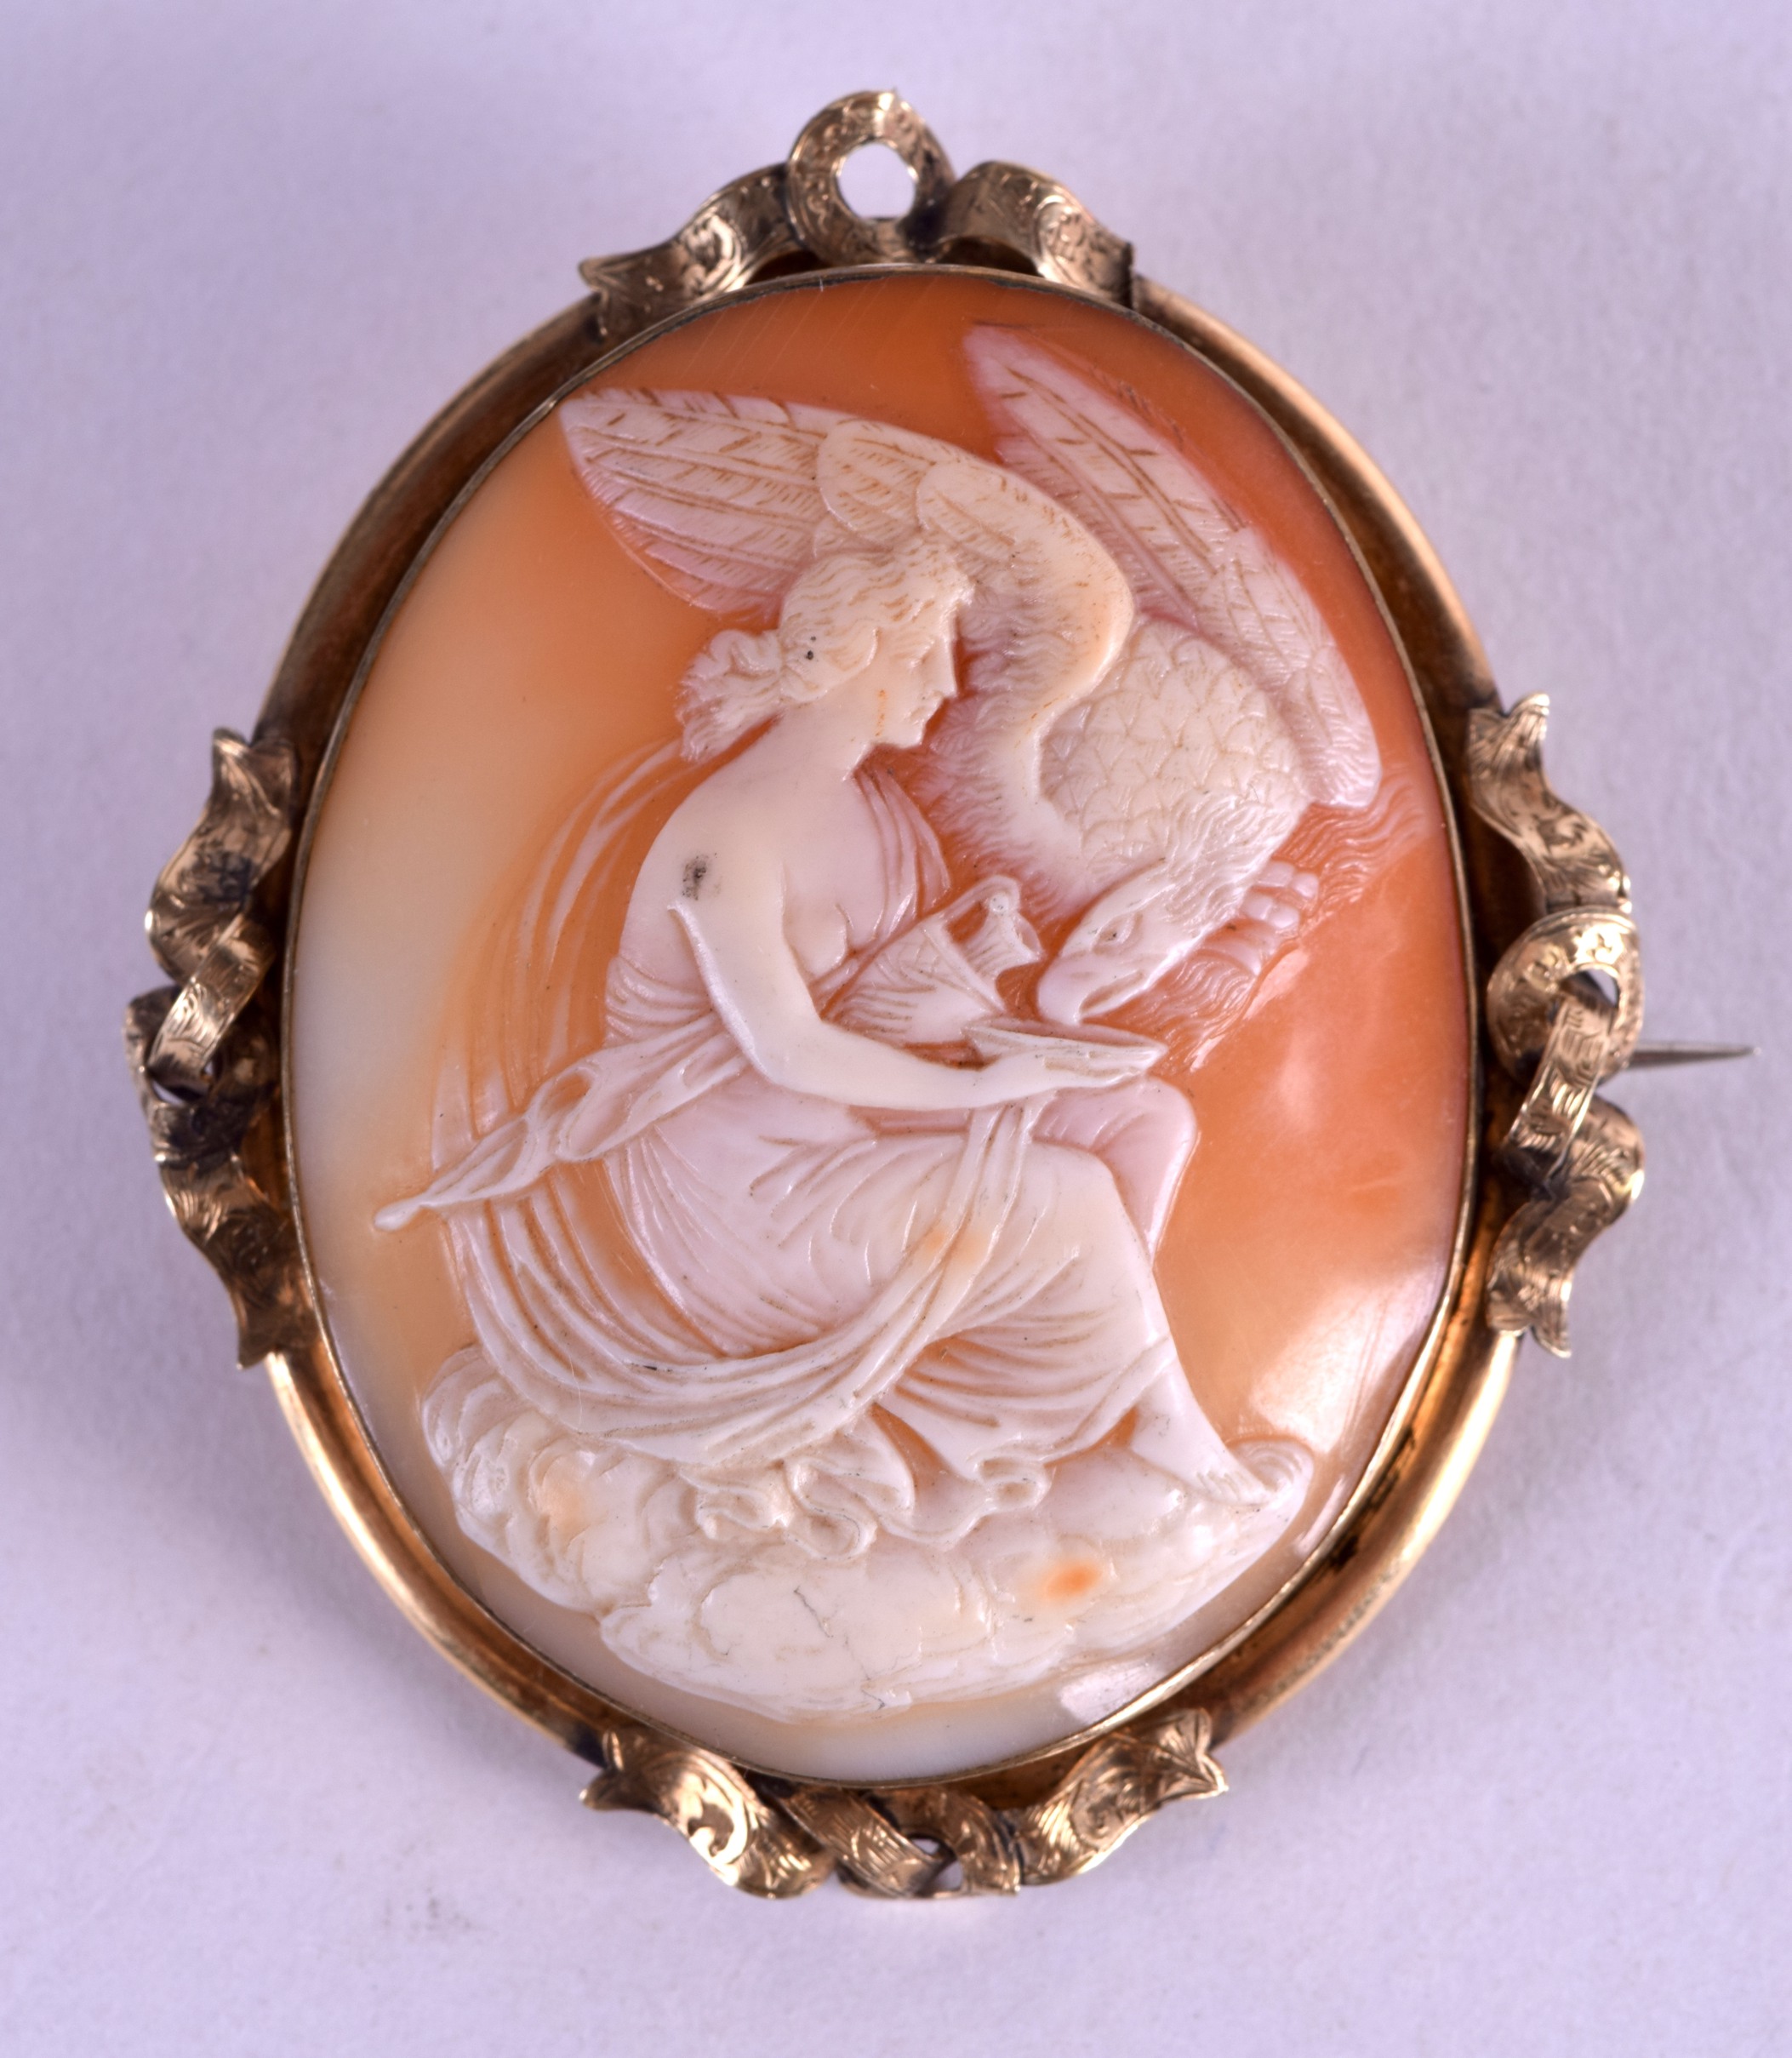 A LARGE VICTORIAN YELLOW METAL CAMEO BROOCH. 4.5 cm x 5.5 cm.